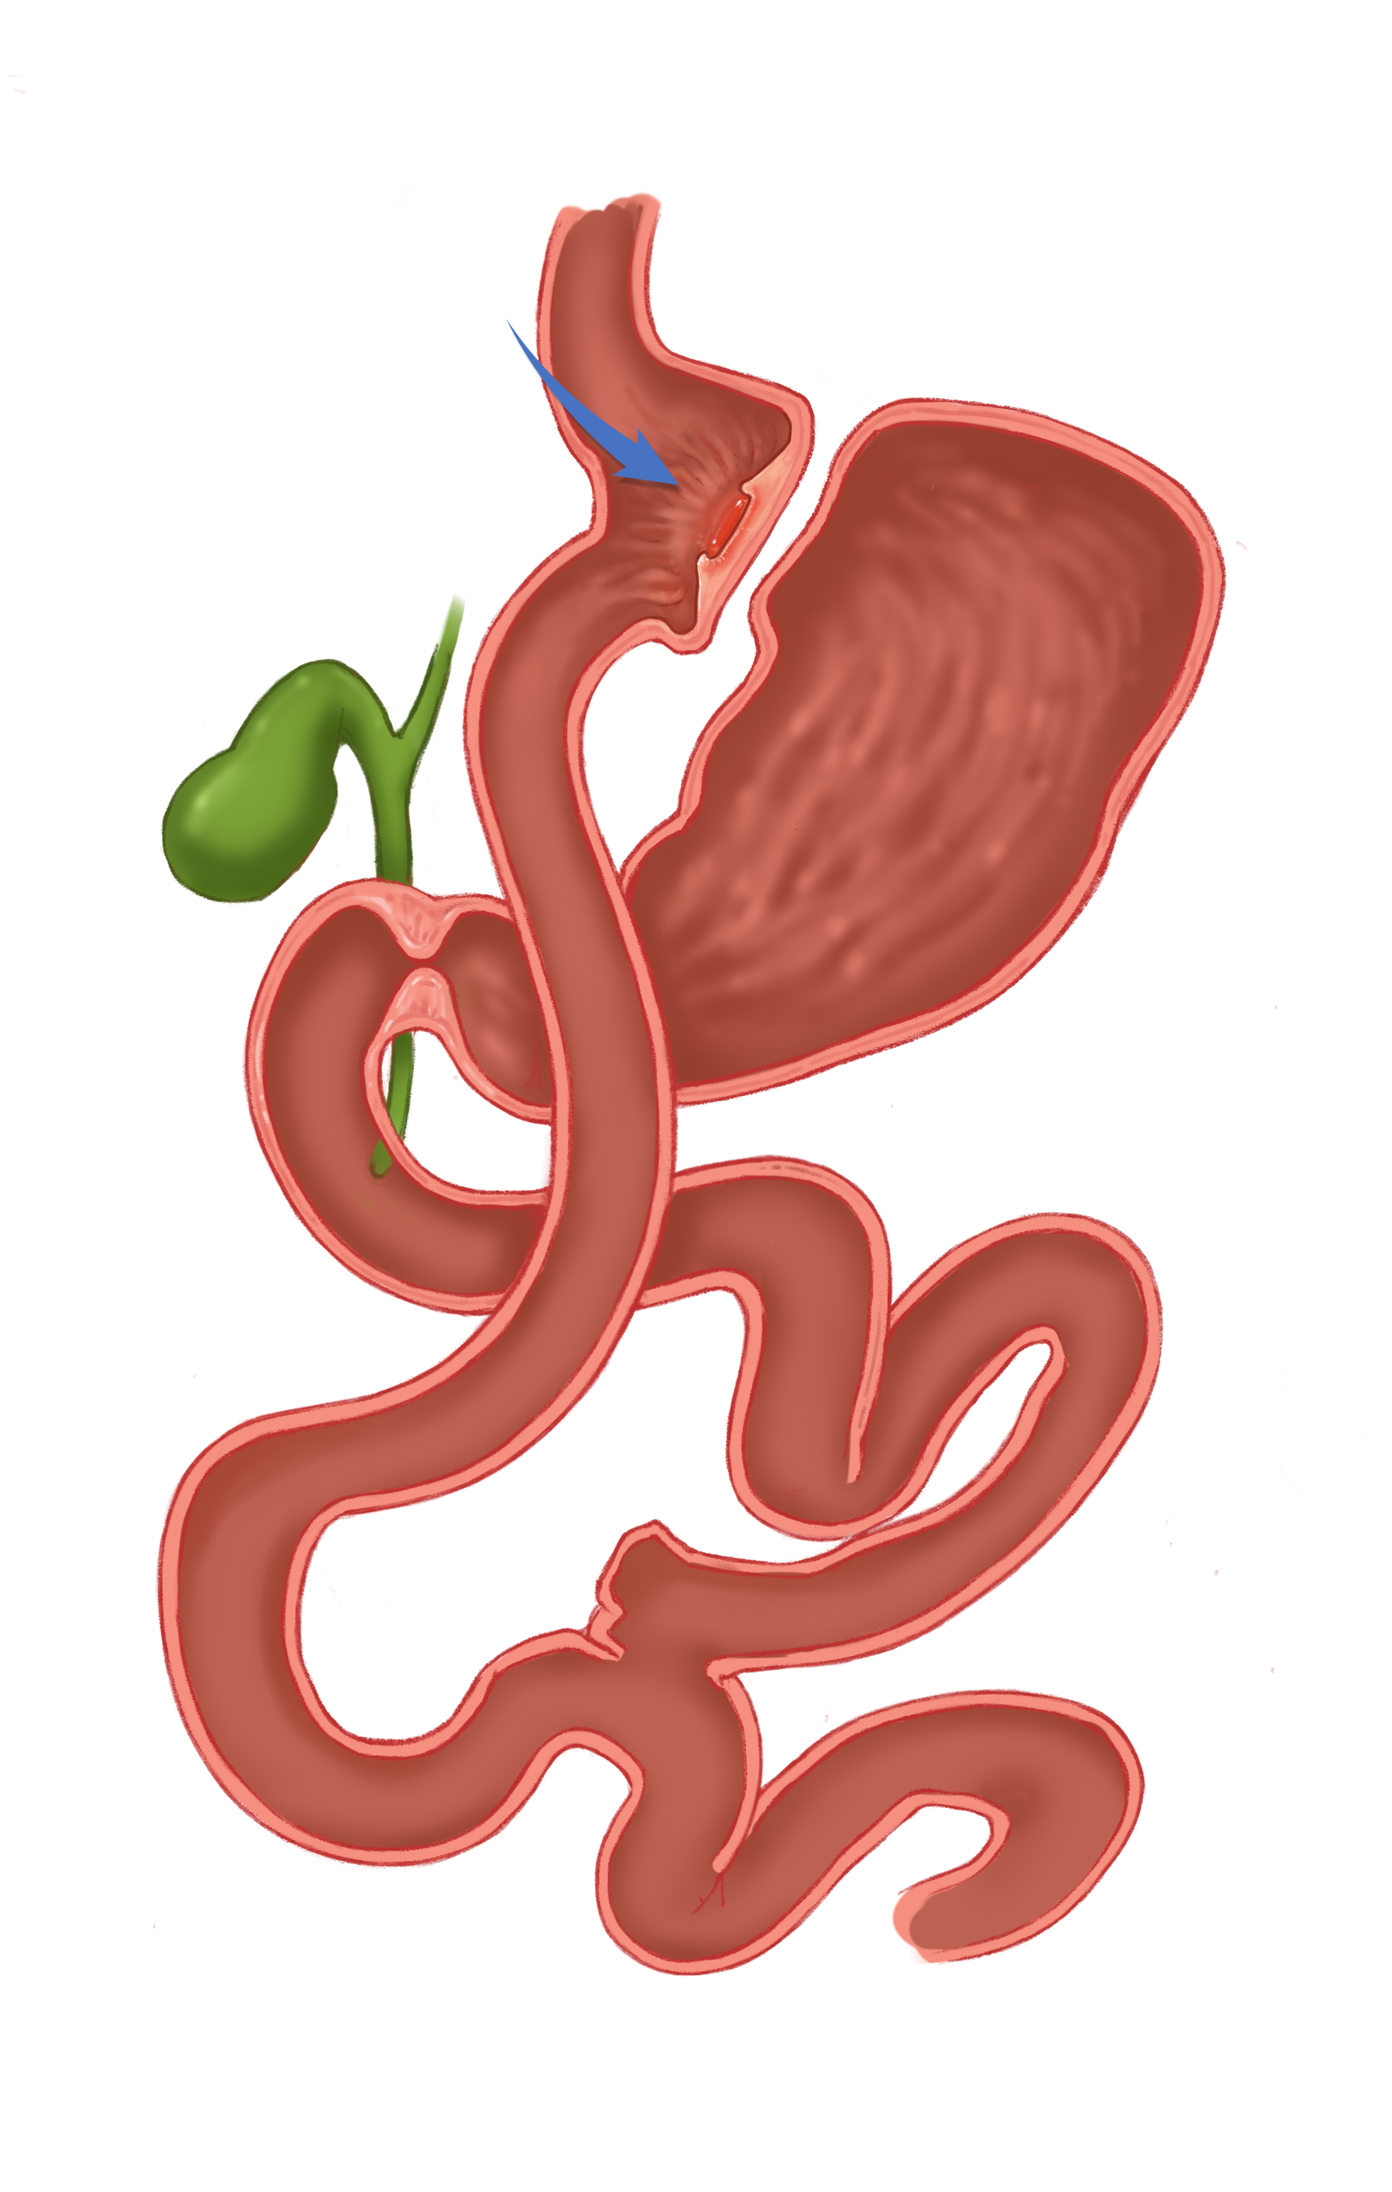 Roux-en-Y Gastric Bypass Marginal Ulcers